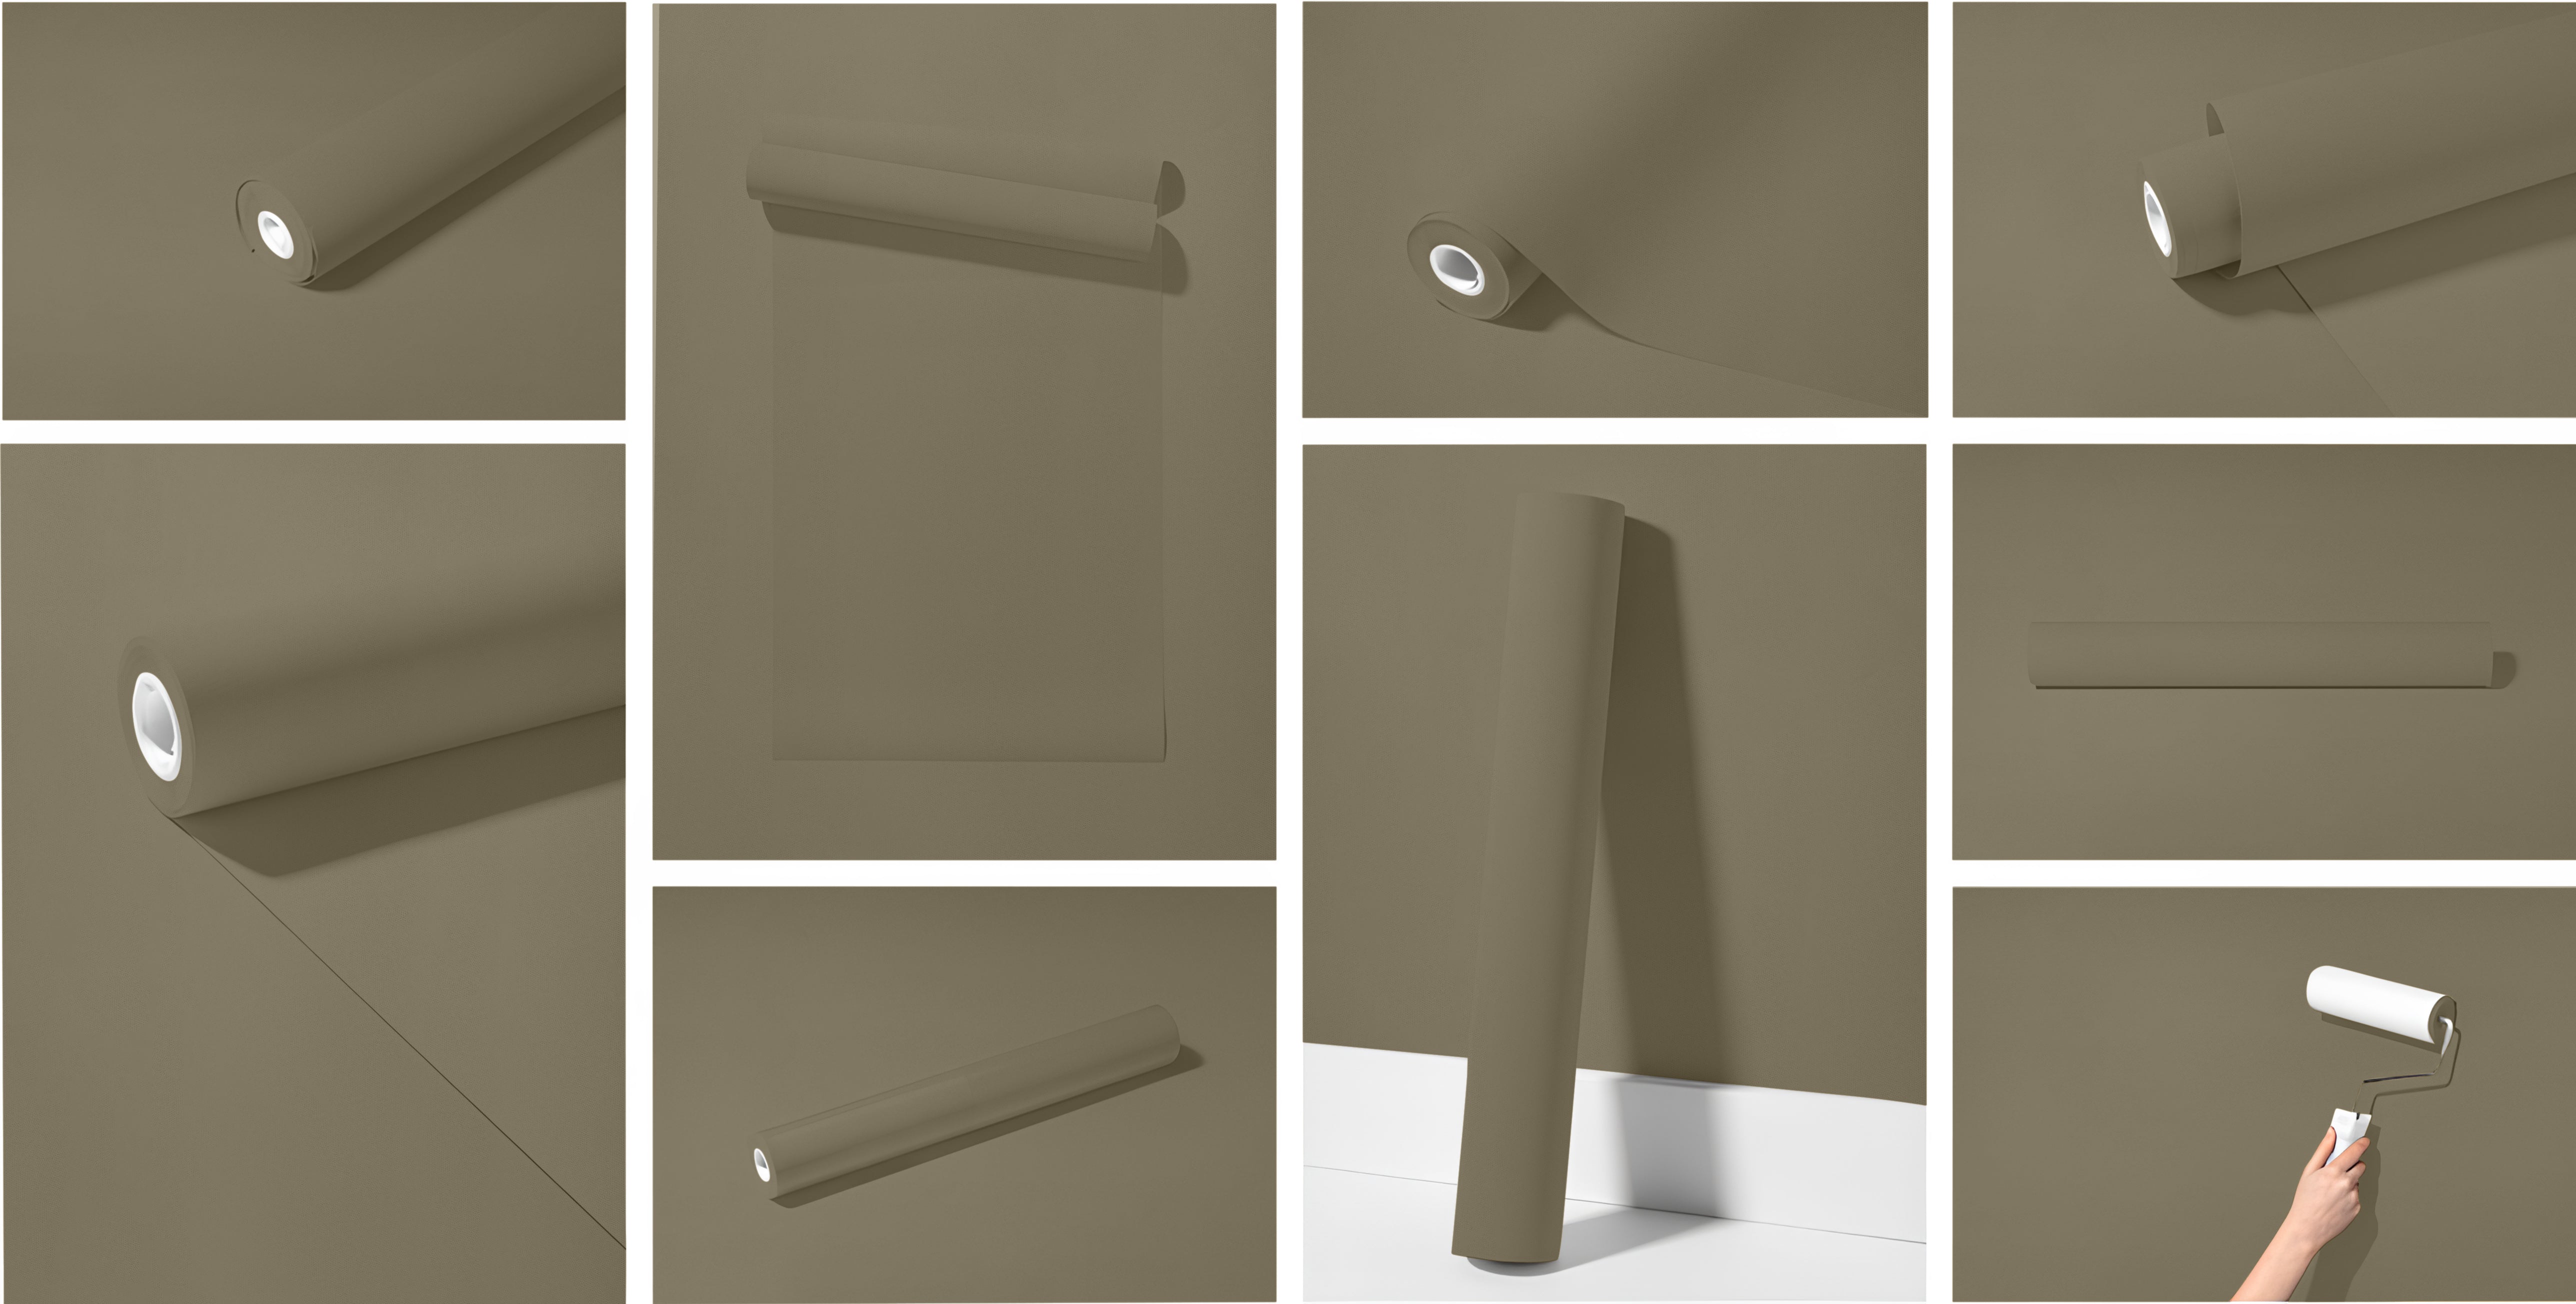 Peel & Stick Removable Re-usable Paint - Color RAL 7002 Olive Grey - offRAL™ - RALRAW LLC, USA